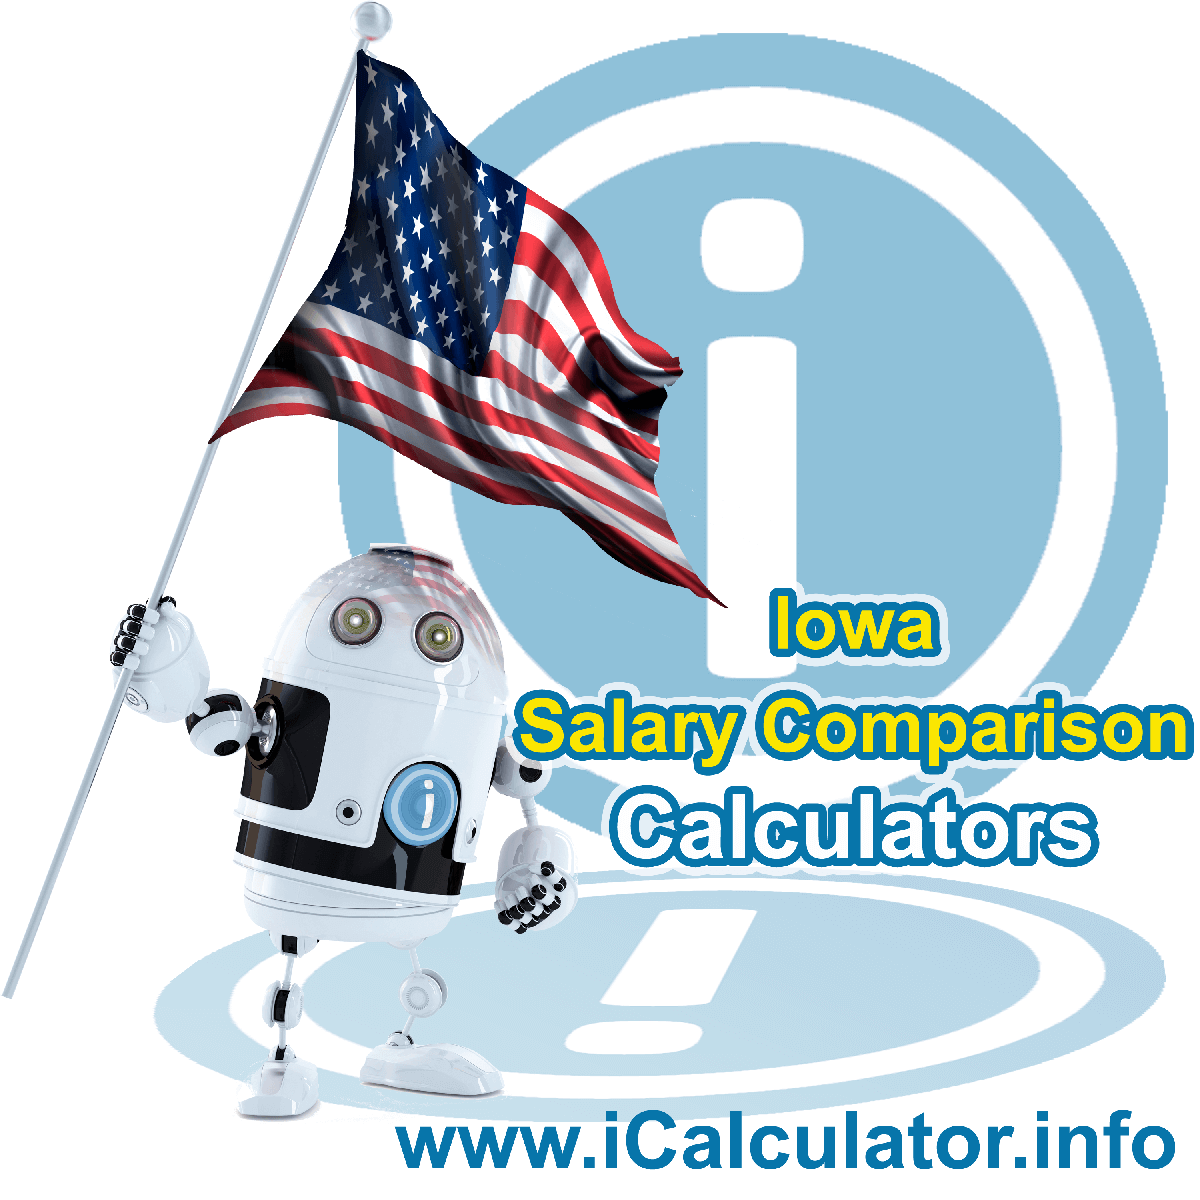 Iowa Salary Comparison Calculator 2023 | iCalculator™ | The Iowa Salary Comparison Calculator allows you to quickly calculate and compare upto 6 salaries in Iowa or compare with other states for the 2023 tax year and historical tax years. 